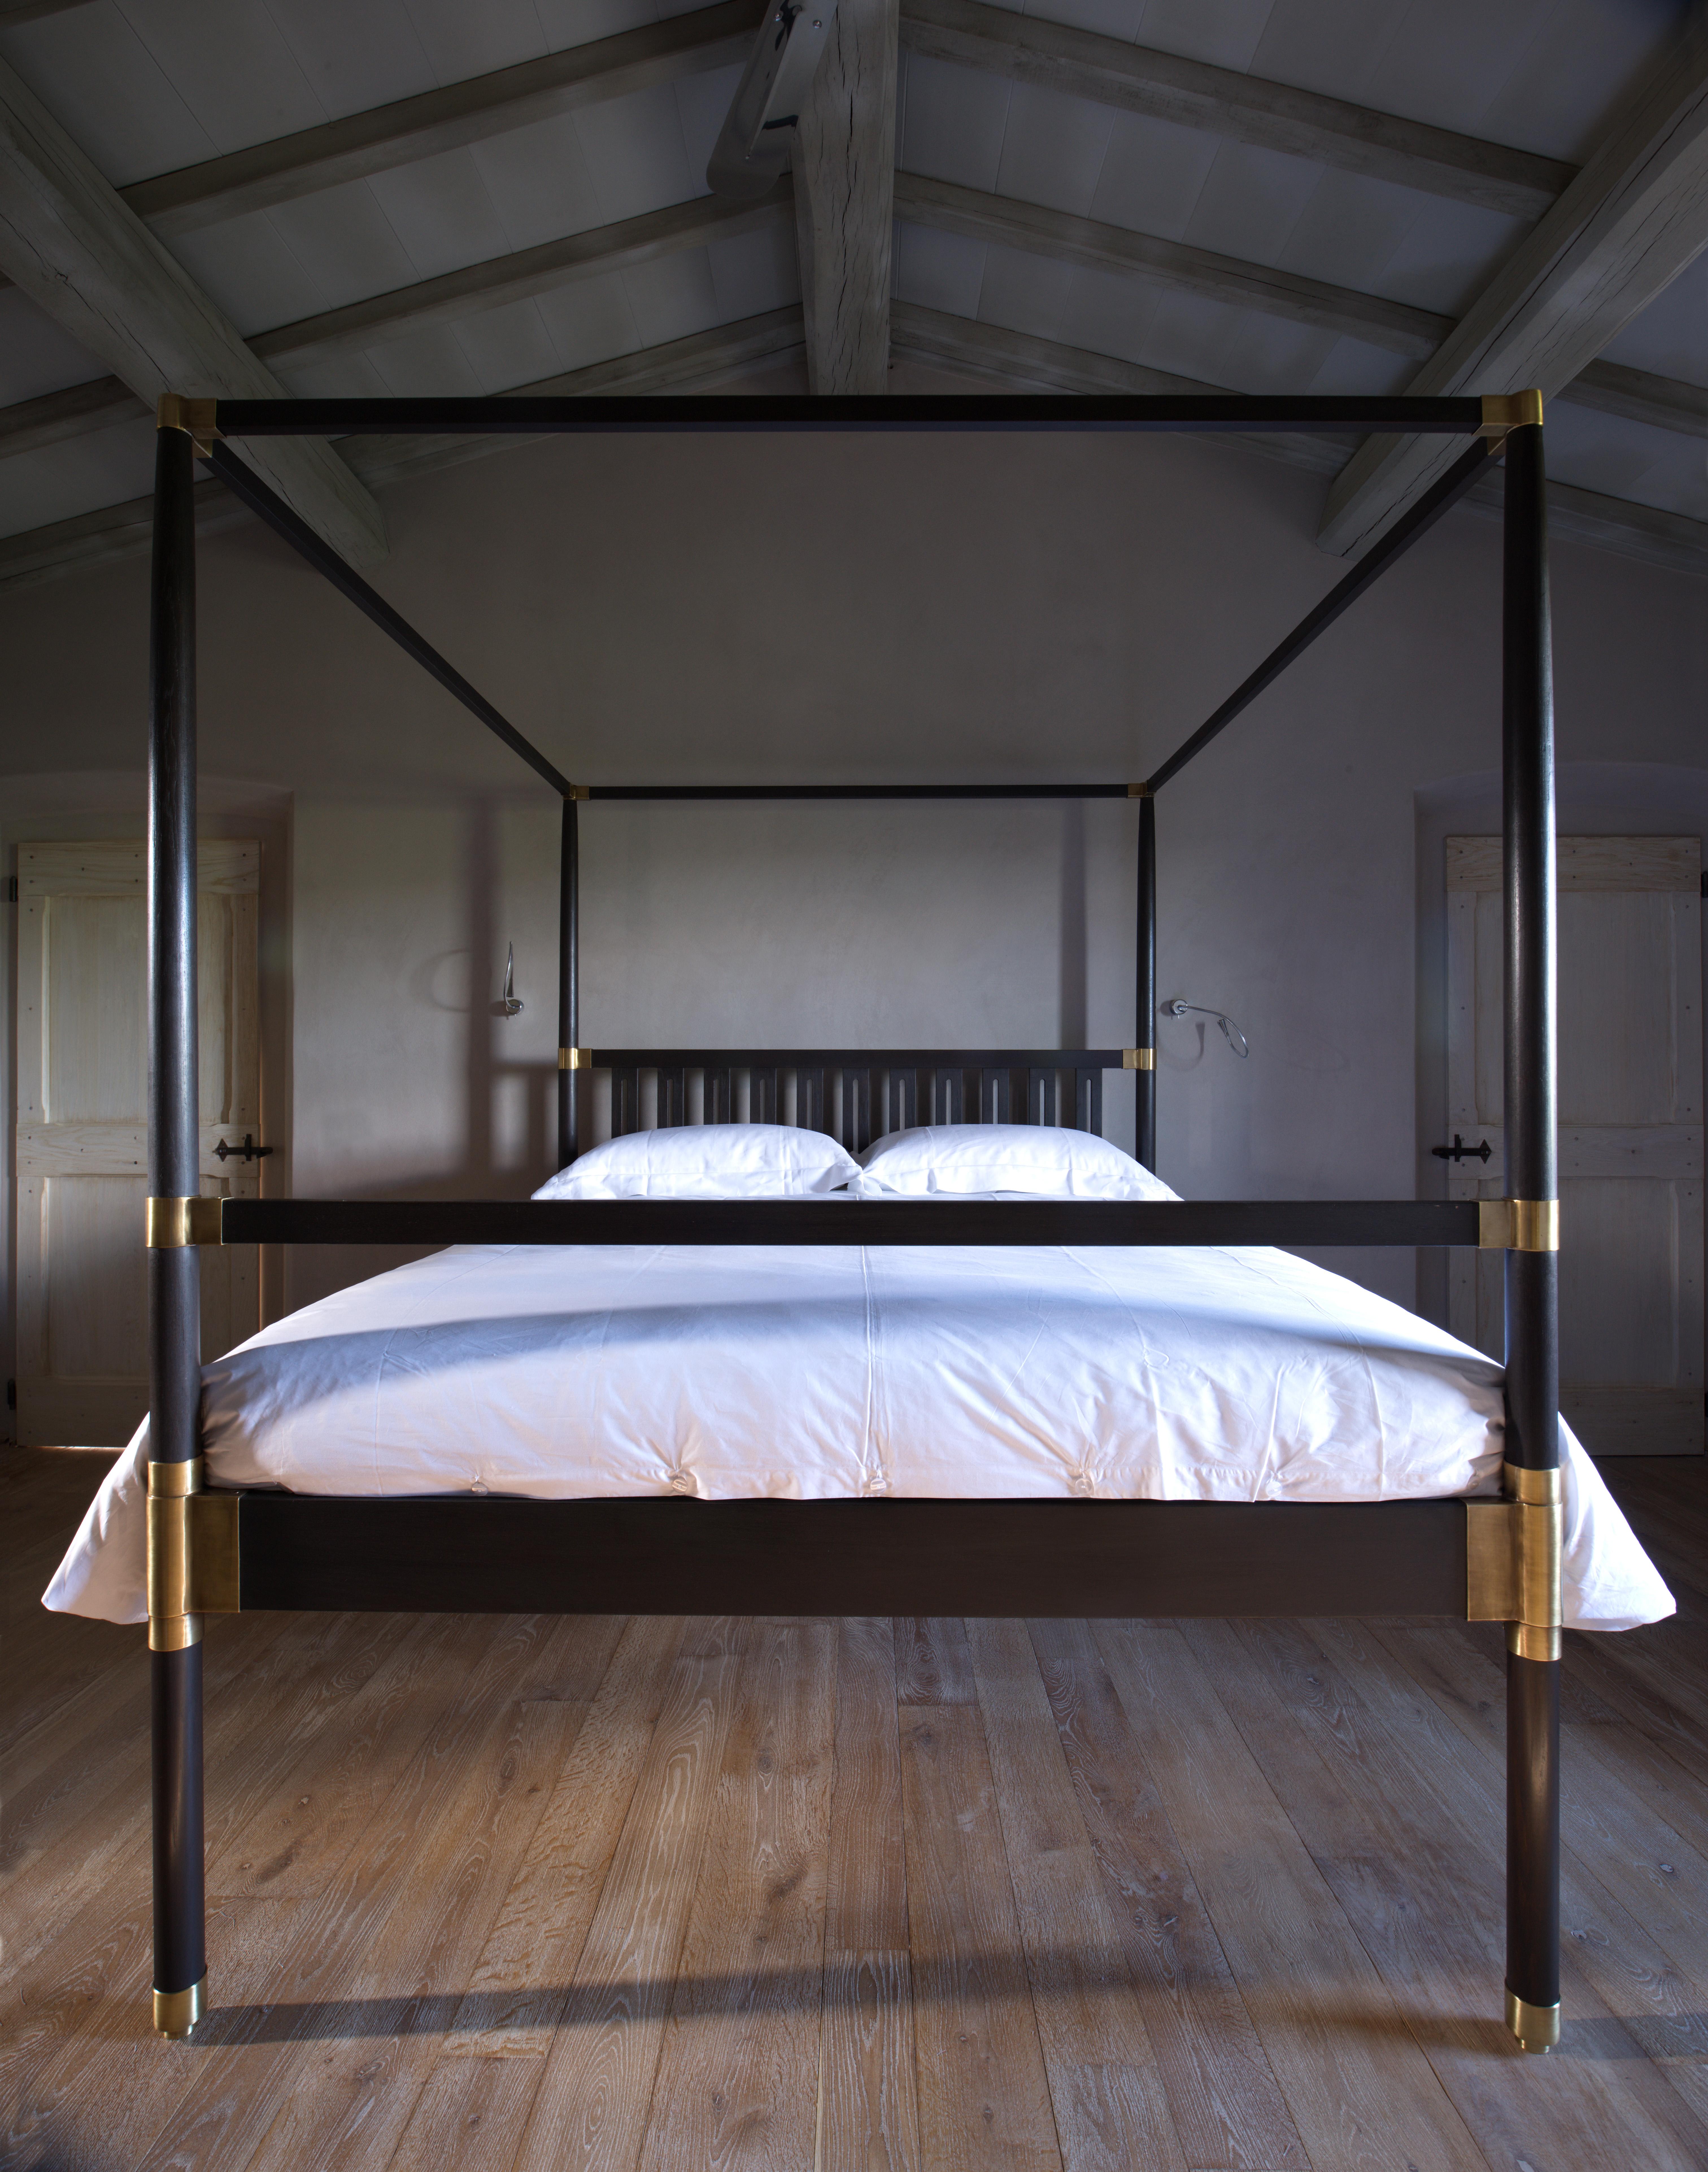 The Campaign bed, ebonized oak and brass-plated steel four poster bed
B.B. - The design, inspired by the Campaign beds of early 19th century. The mounts can also be nickel-plated making it super chic silver and black.